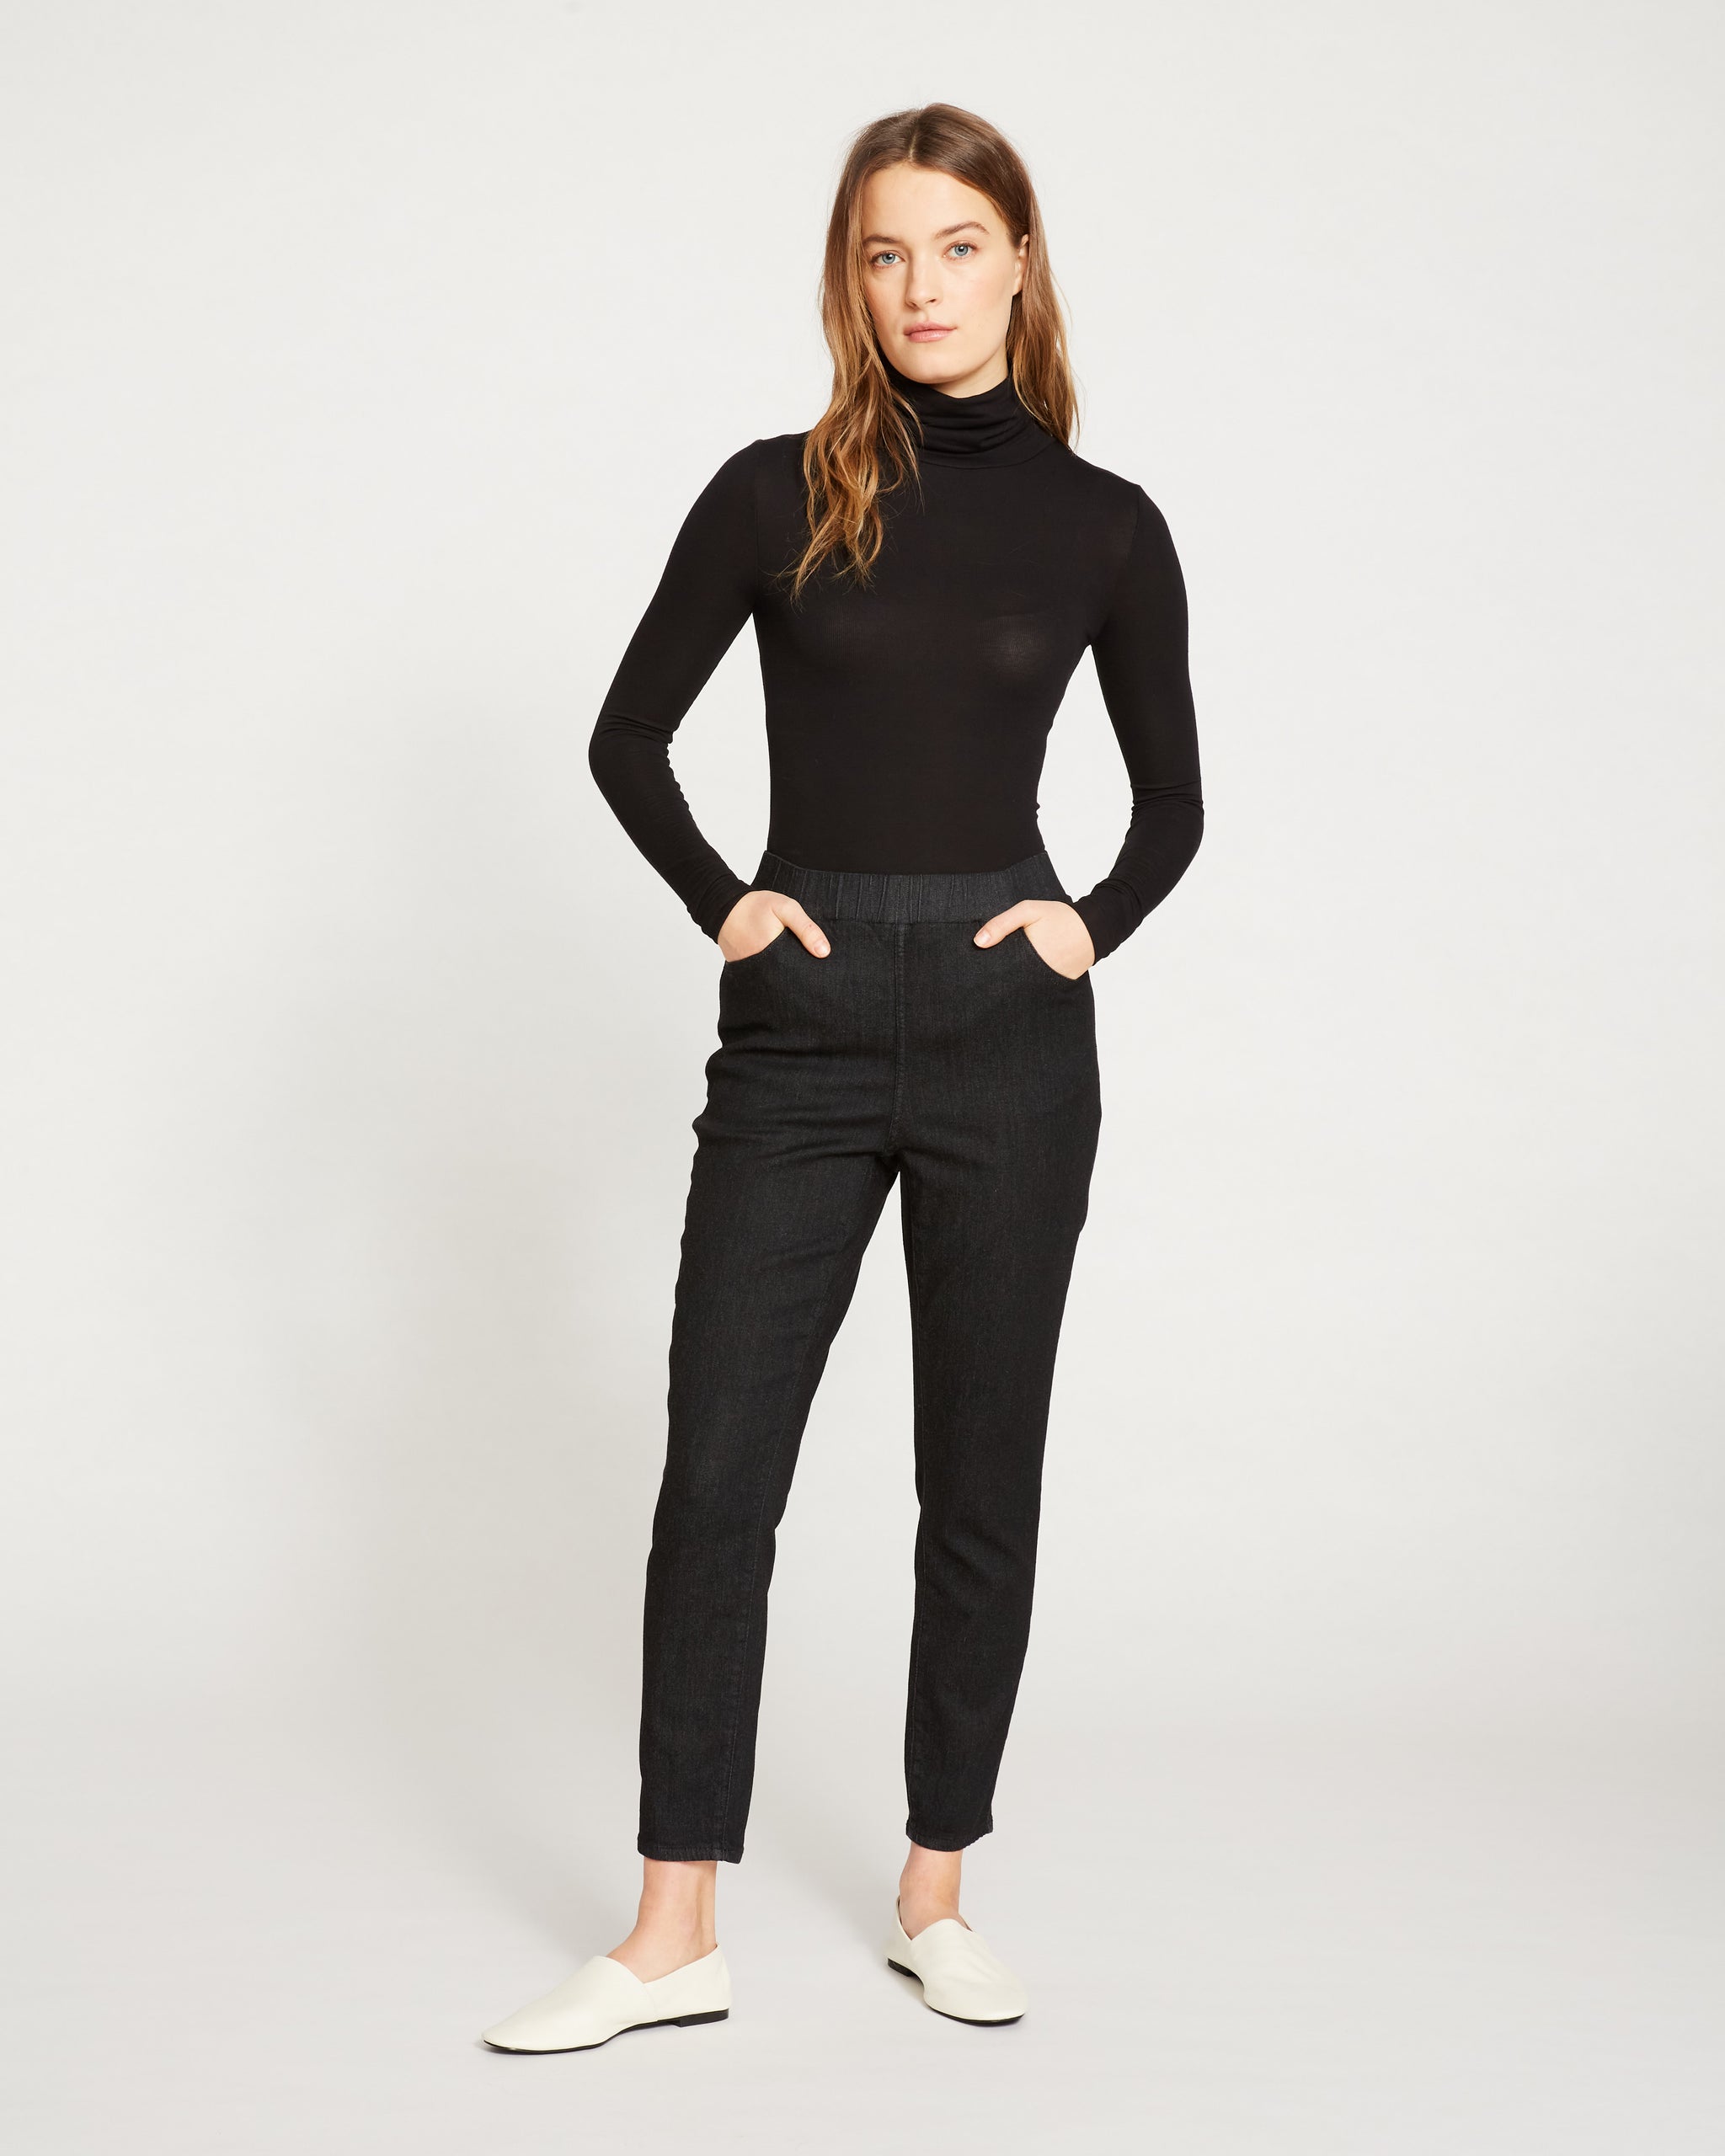 MILLERS - Womens Jeans - Black Jeggings - Cotton Leggings - Smart Casual  Fashion - Elastane - Full Length Tights - Office Trousers - Work Clothes -  Black